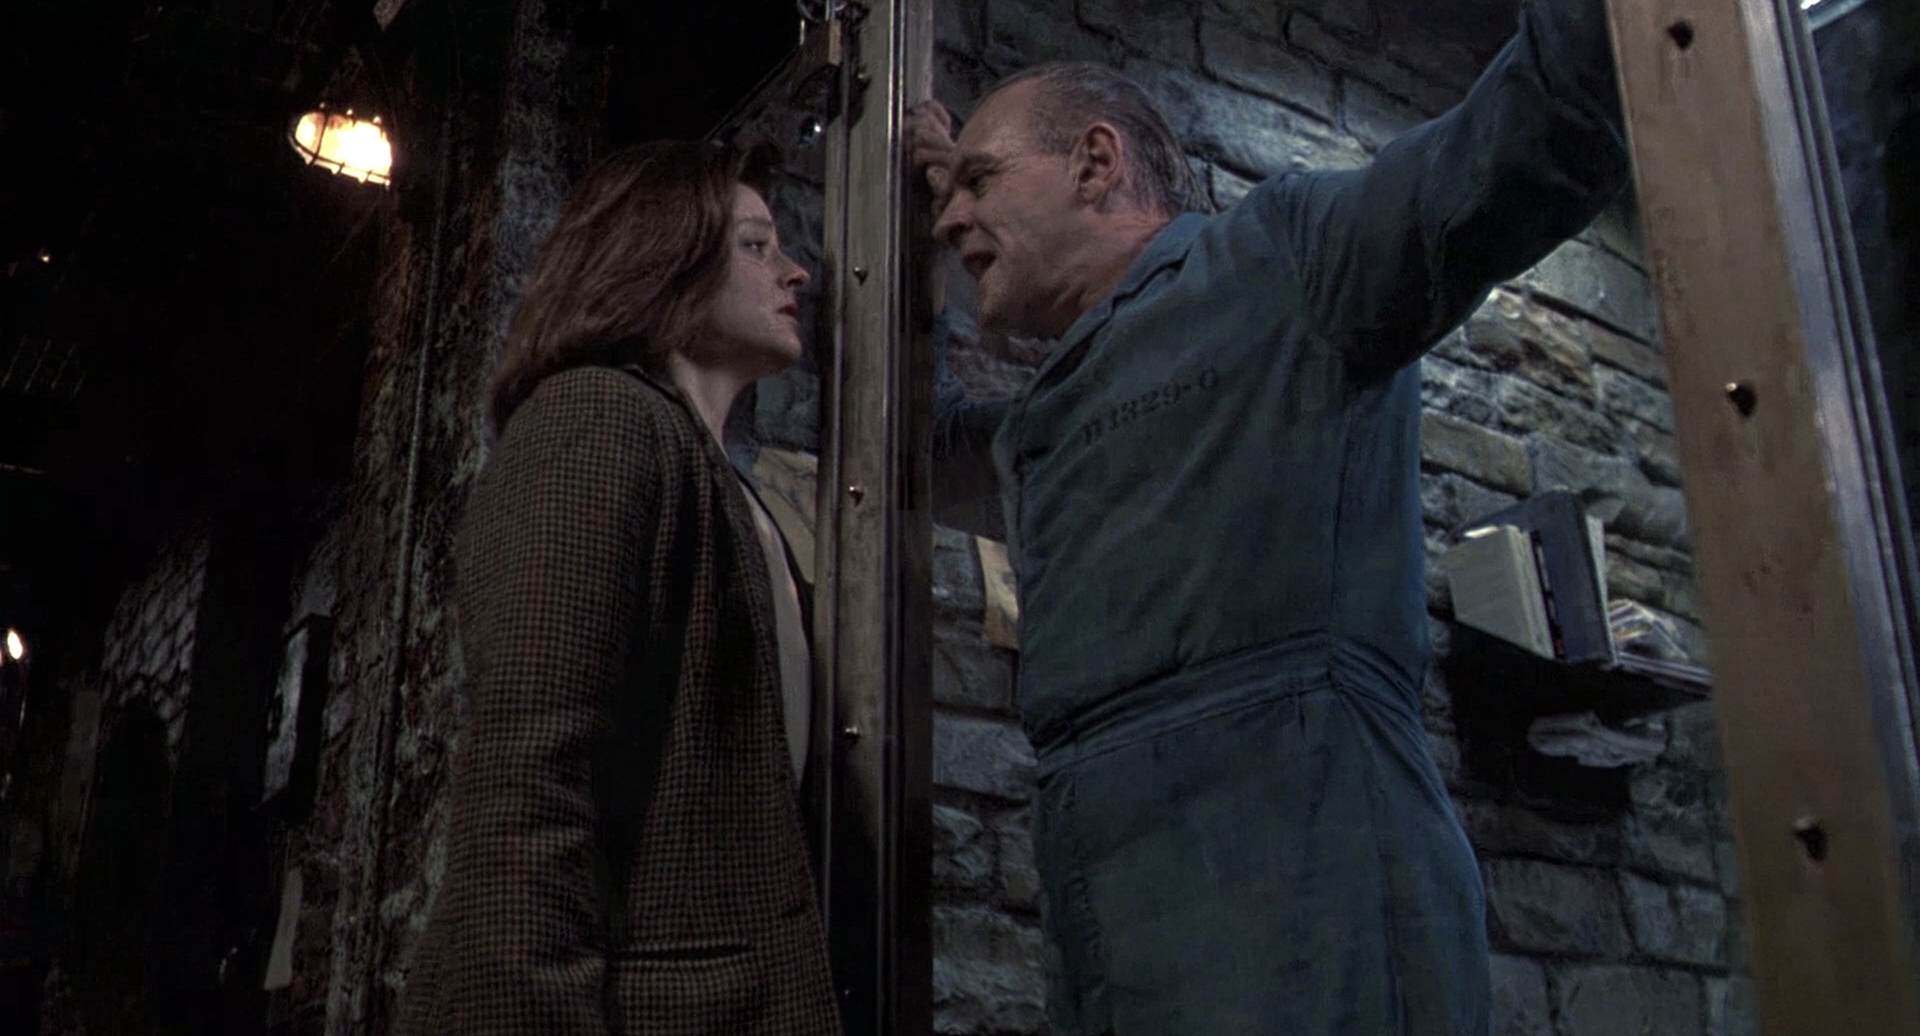 visual subtext - film stills from "The Silence of the Lambs"